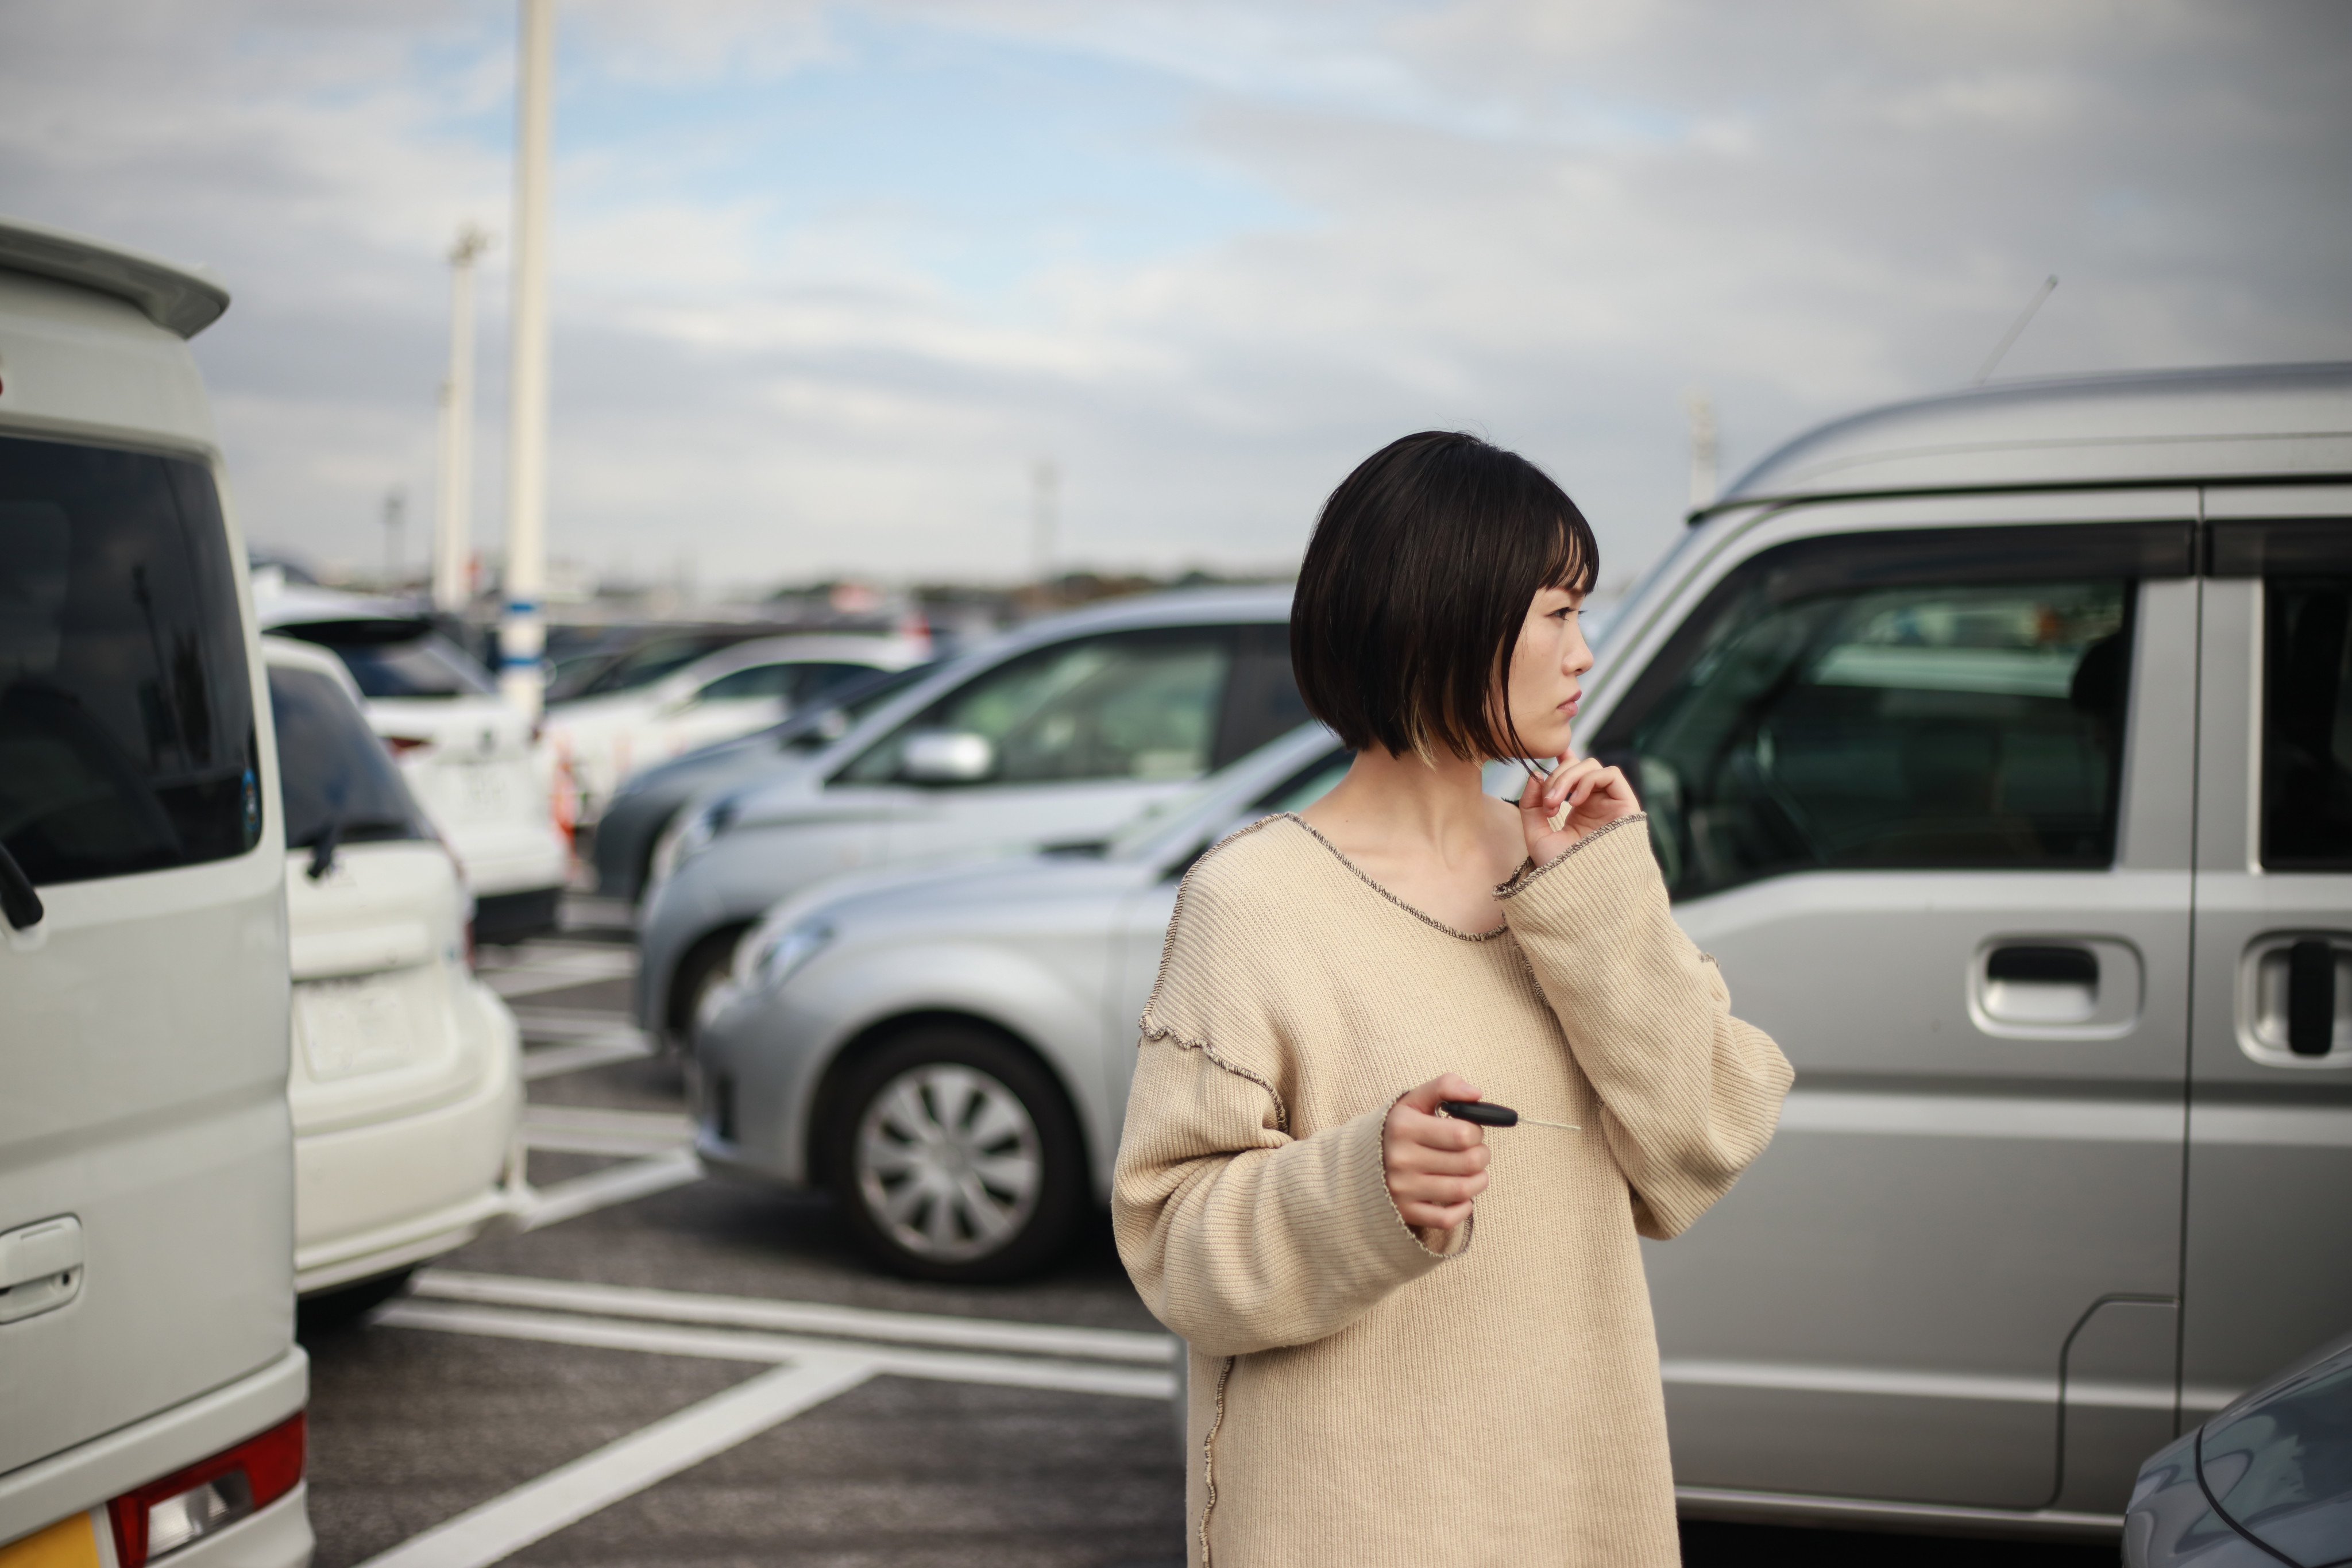 There is a big difference between exiting a shopping centre and not remembering where you parked your car and forgetting where you are or how you got there. The latter could indicate you have a problem, an expert explains. Photo: Shutterstock
